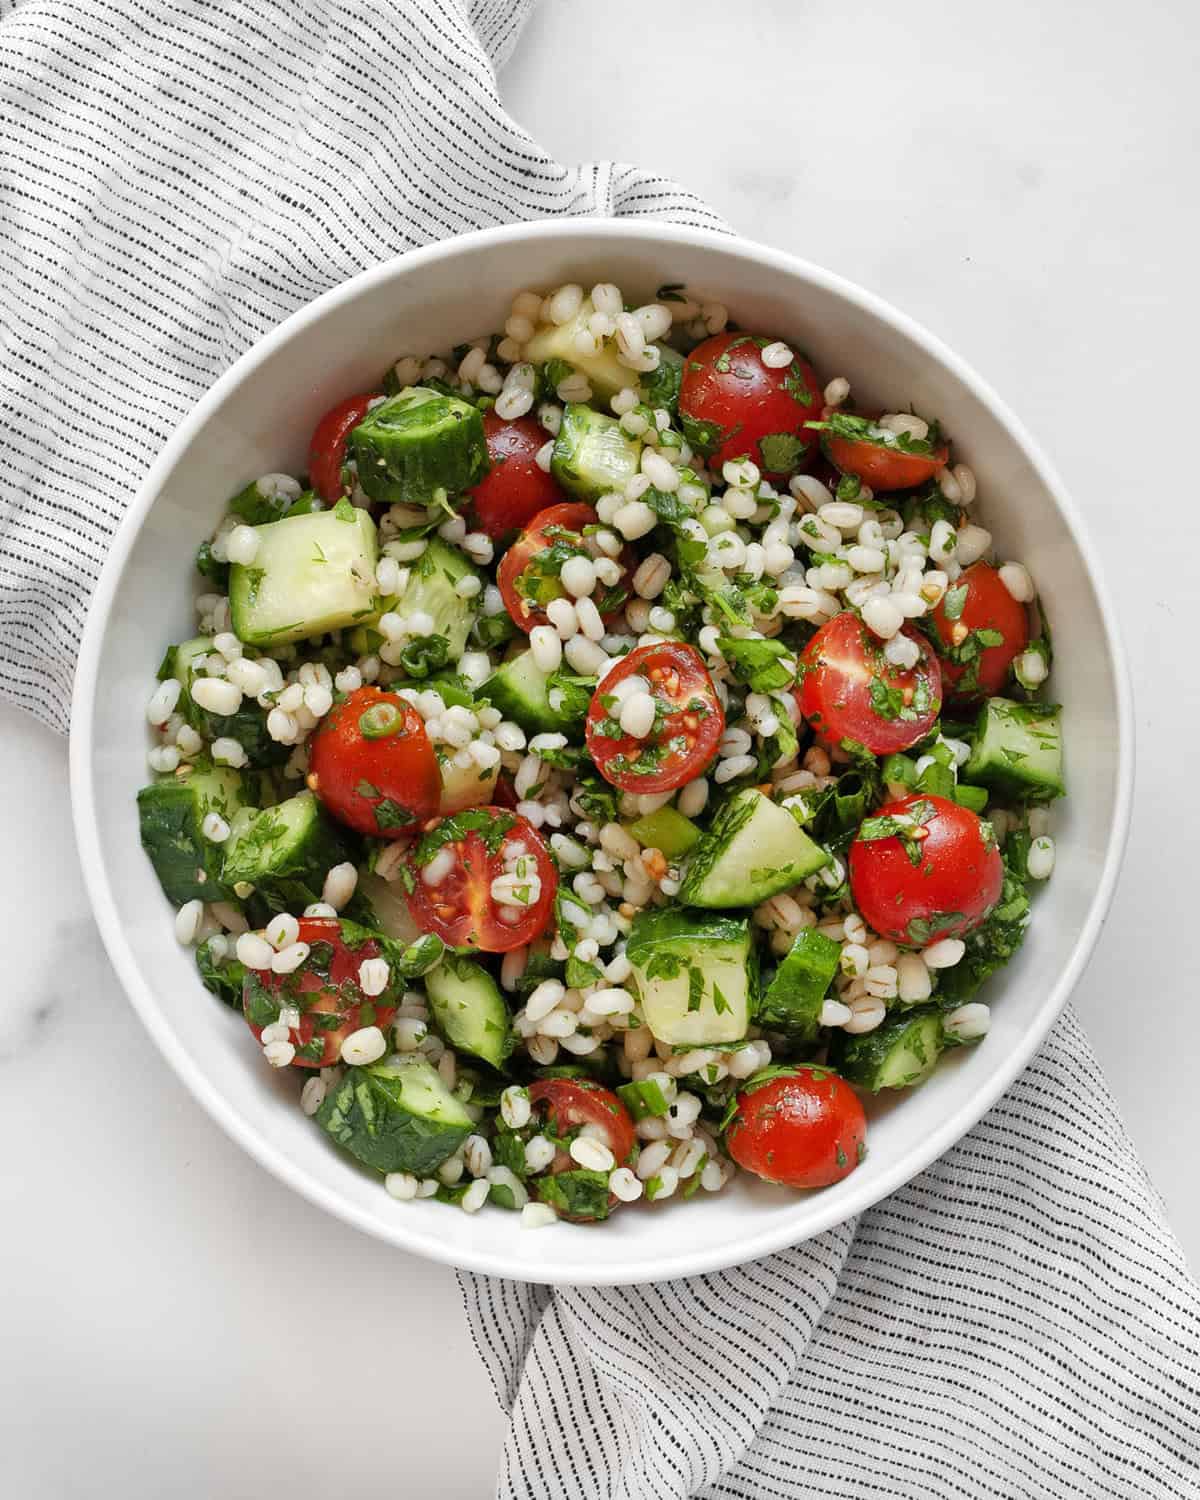 Tabbouleh salad in a small bowl.